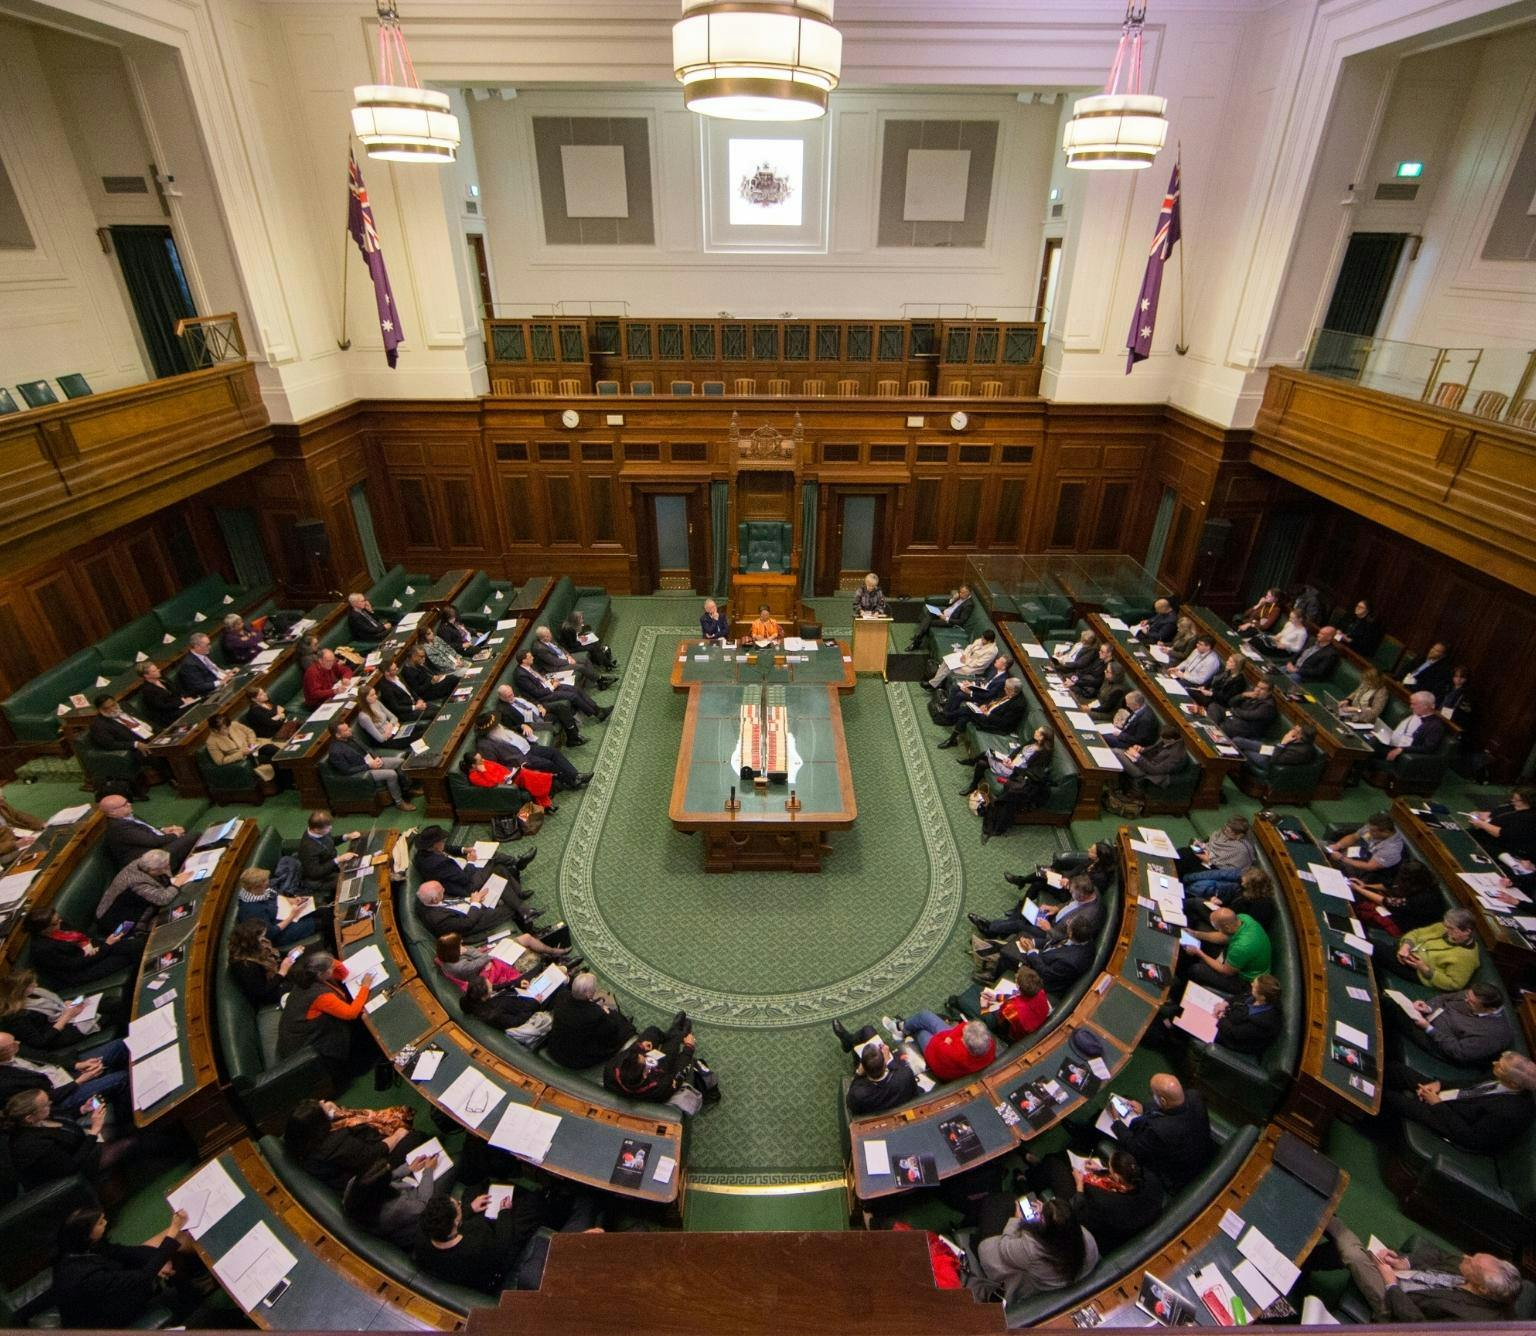 Looking down on the House of Representatives chamber in Old Parliament House. There is a green carpet on the floor, with wooden desks and green leather chairs in a 'u' shape around the centre desk. The seats are filled with people sitting in them.